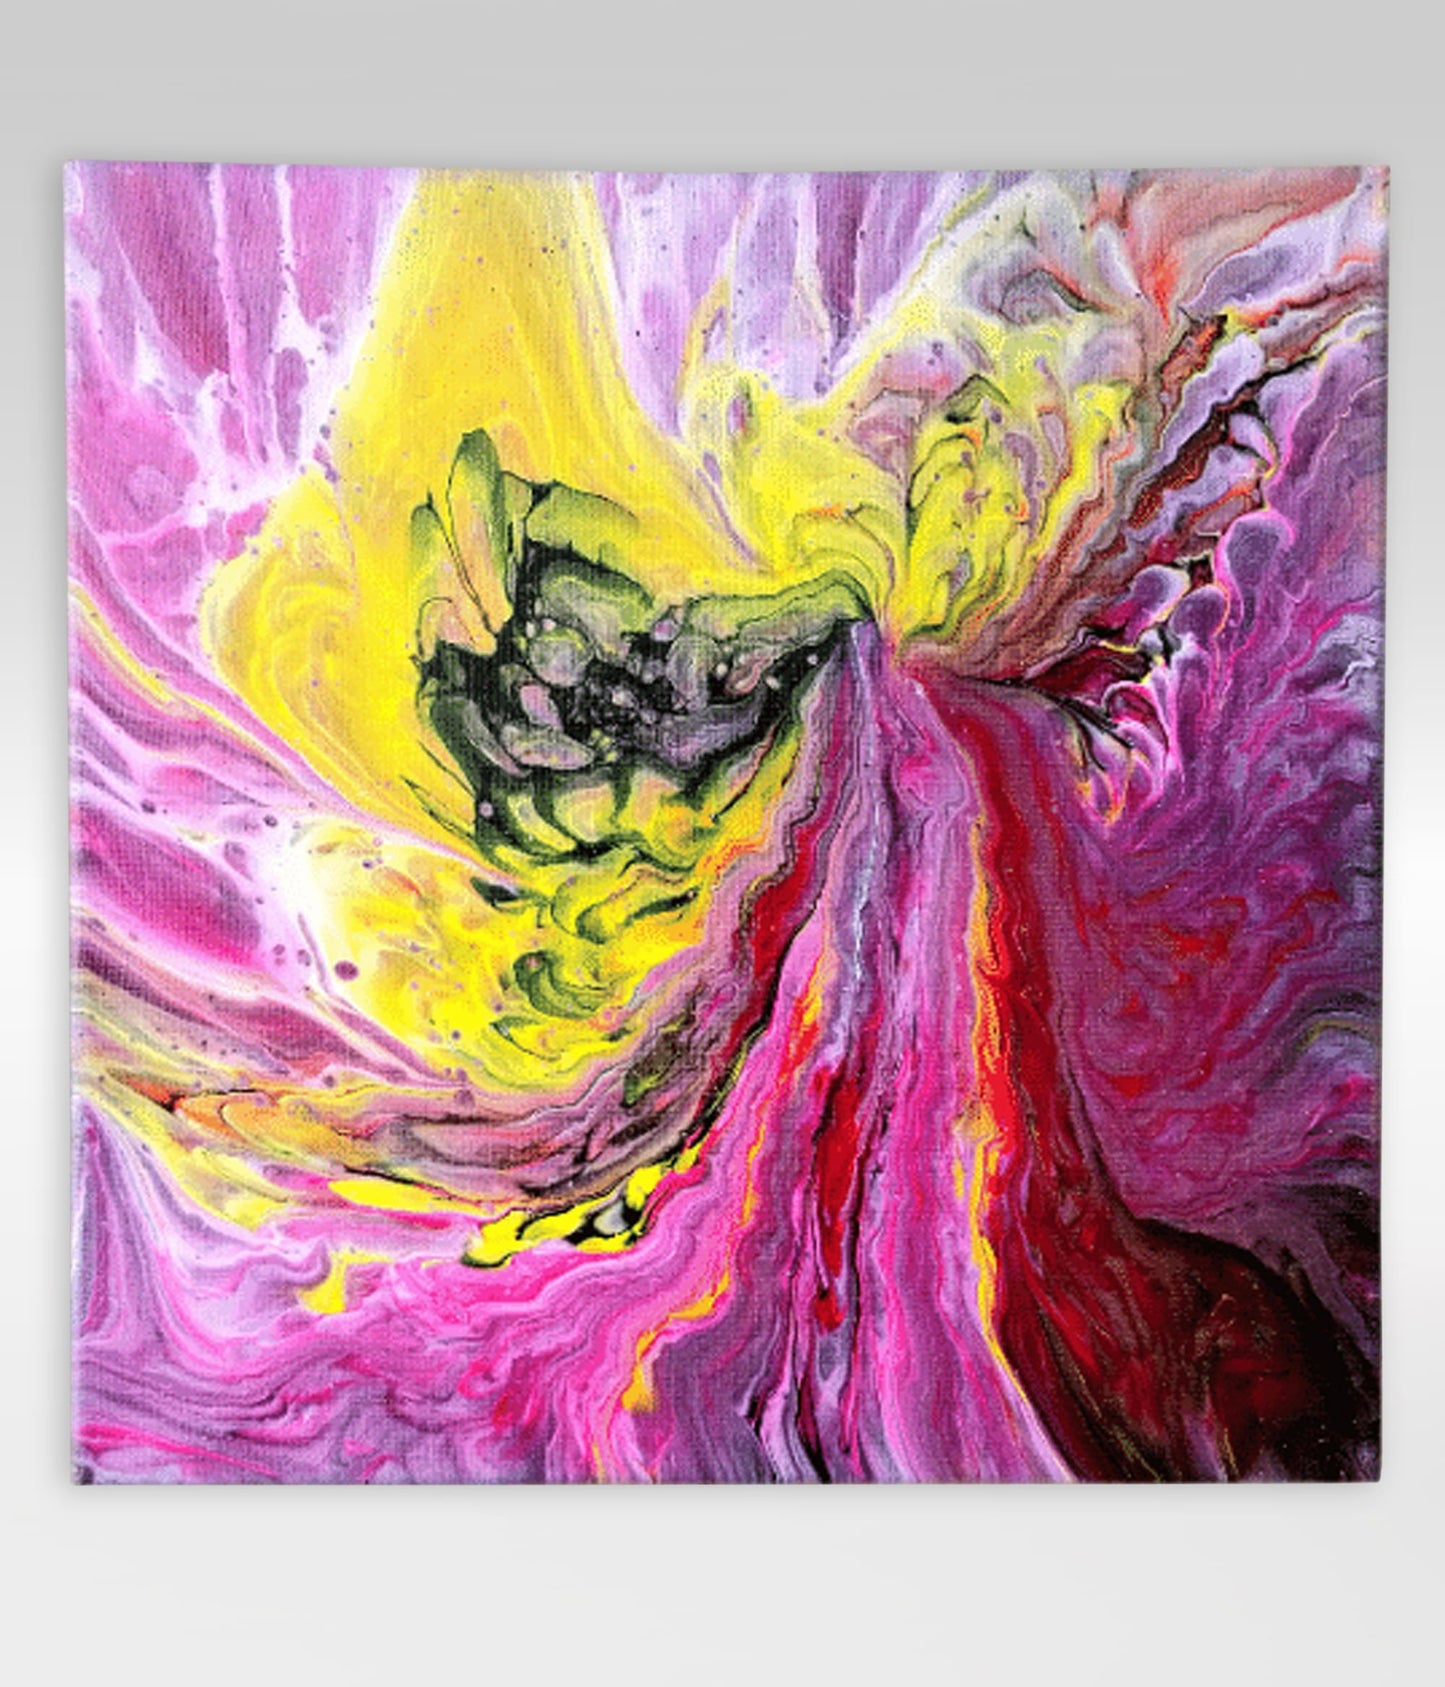 Volcanic – 12 x 12 Acrylic Pour Painting On Canvas